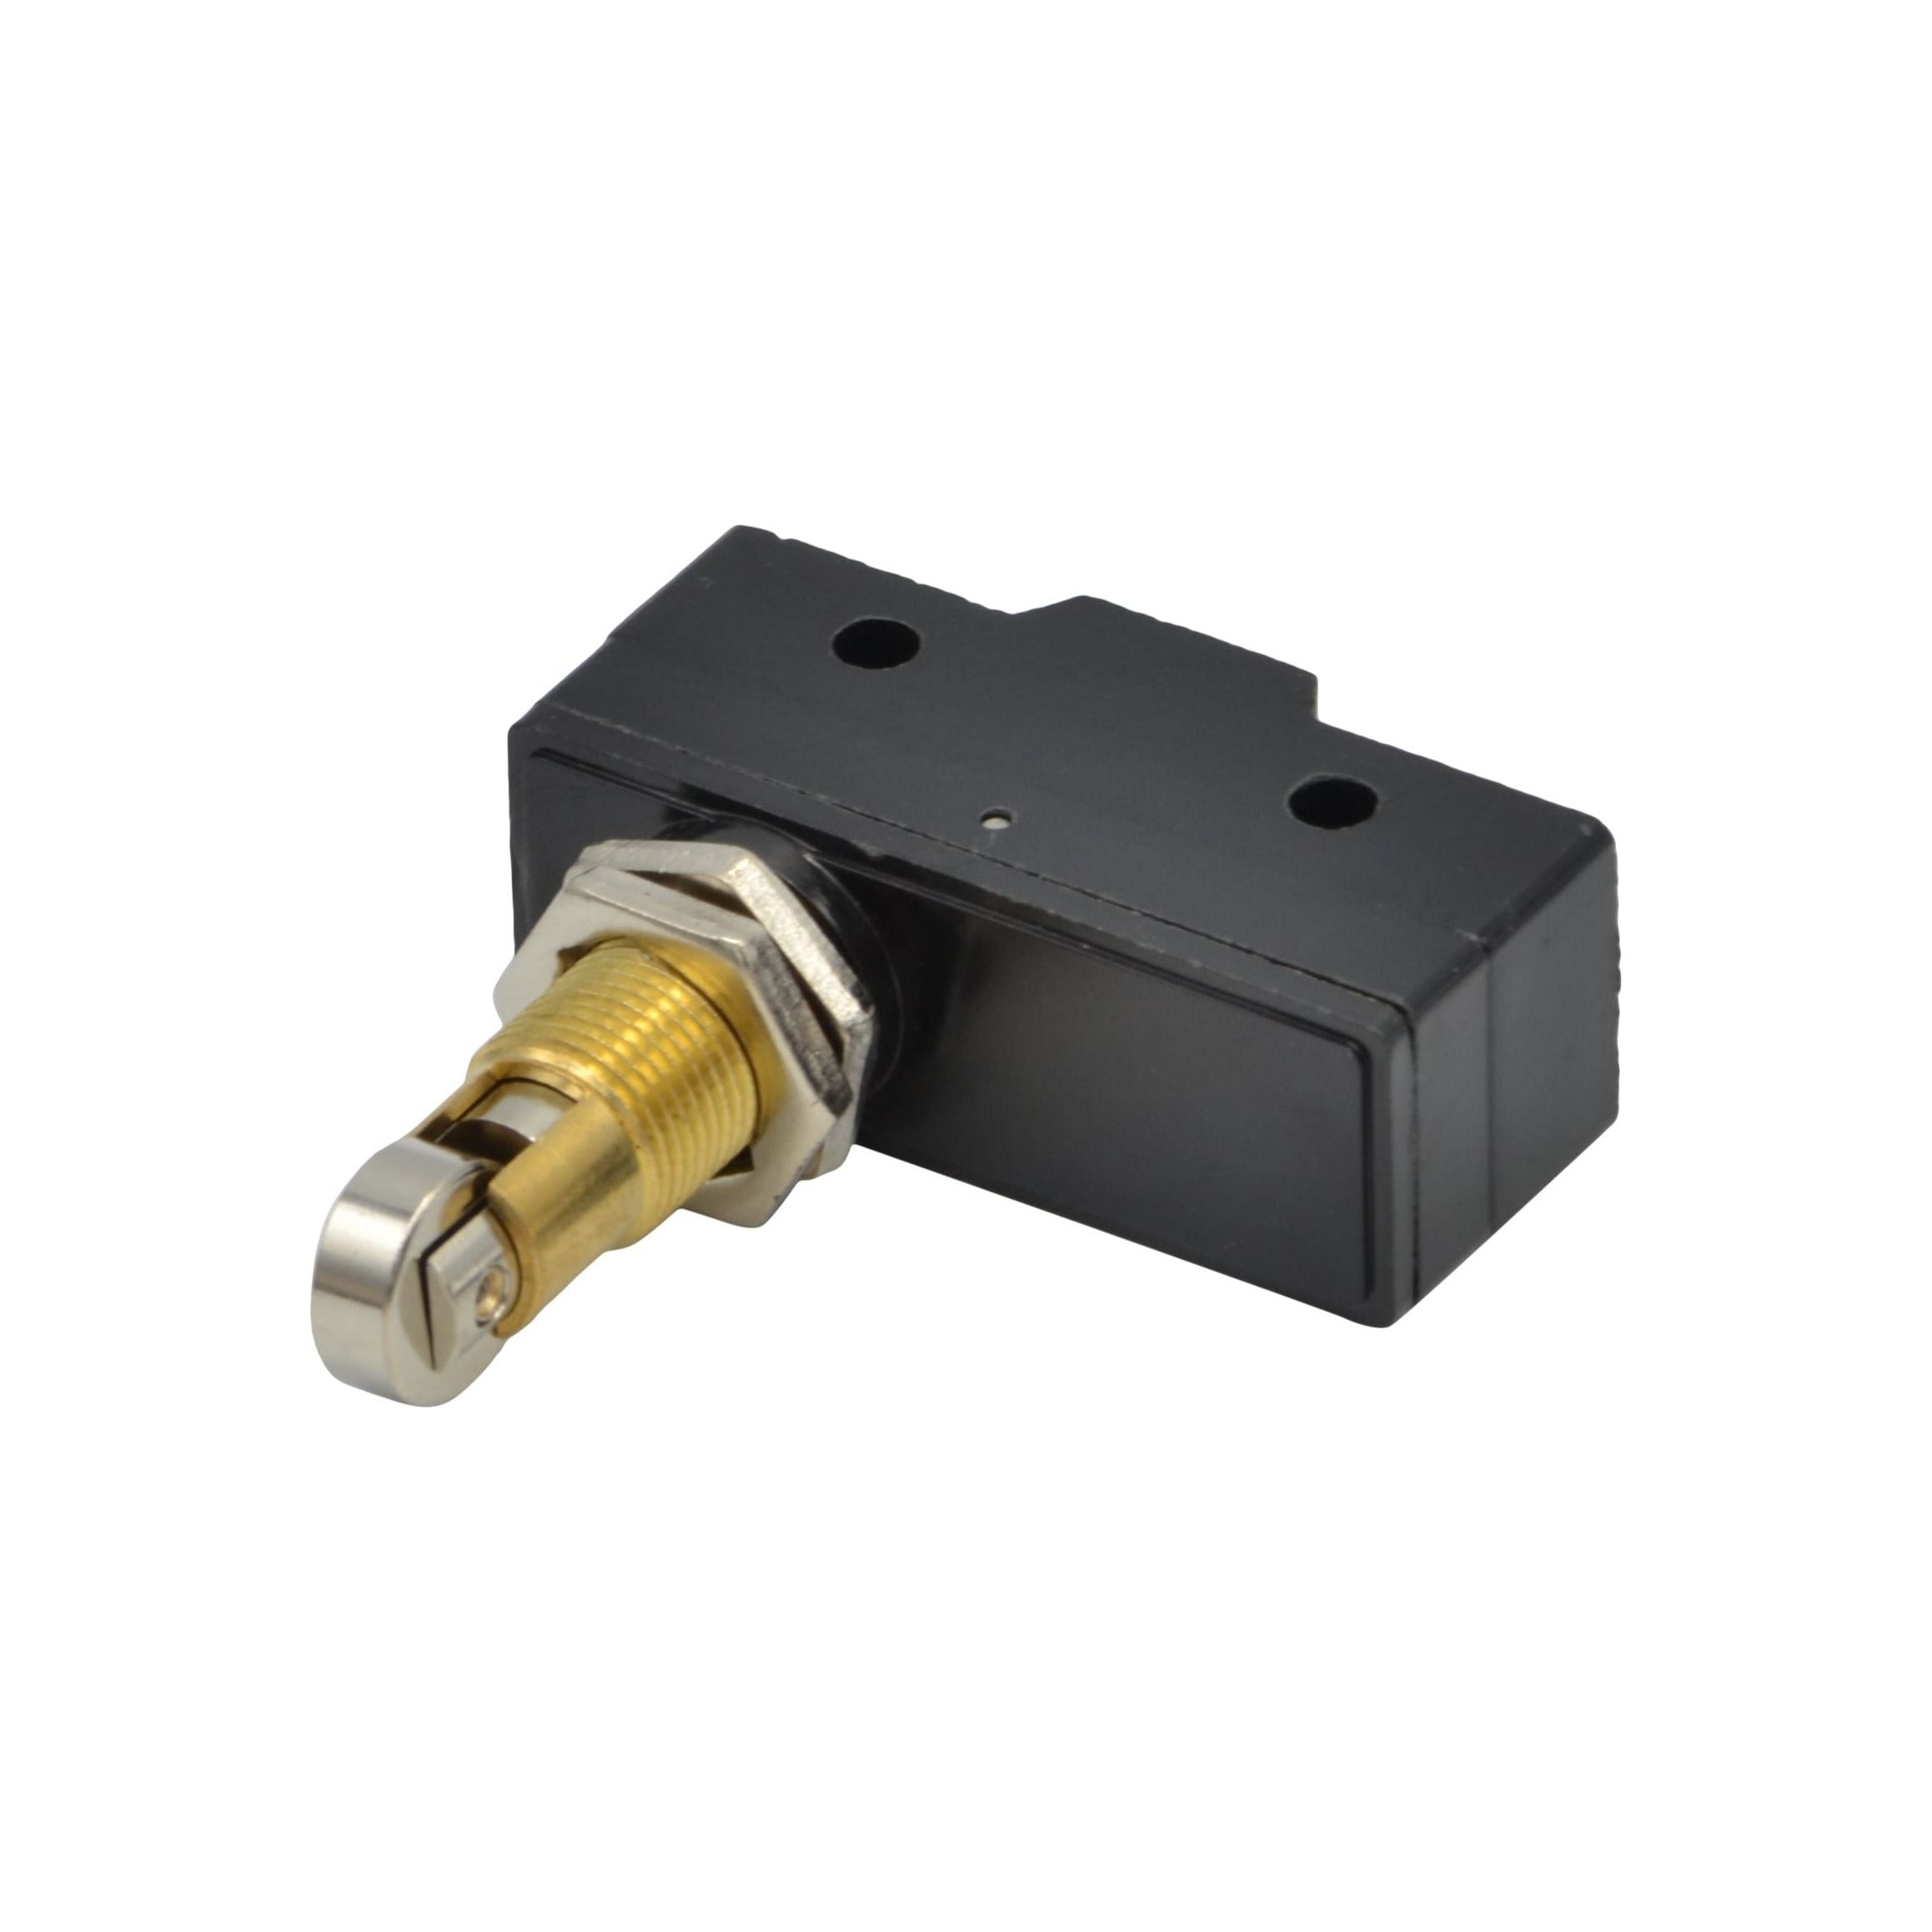 Z-15GQ21-B Panel-Mount Cross Roller Plunger Micro Limit Switch